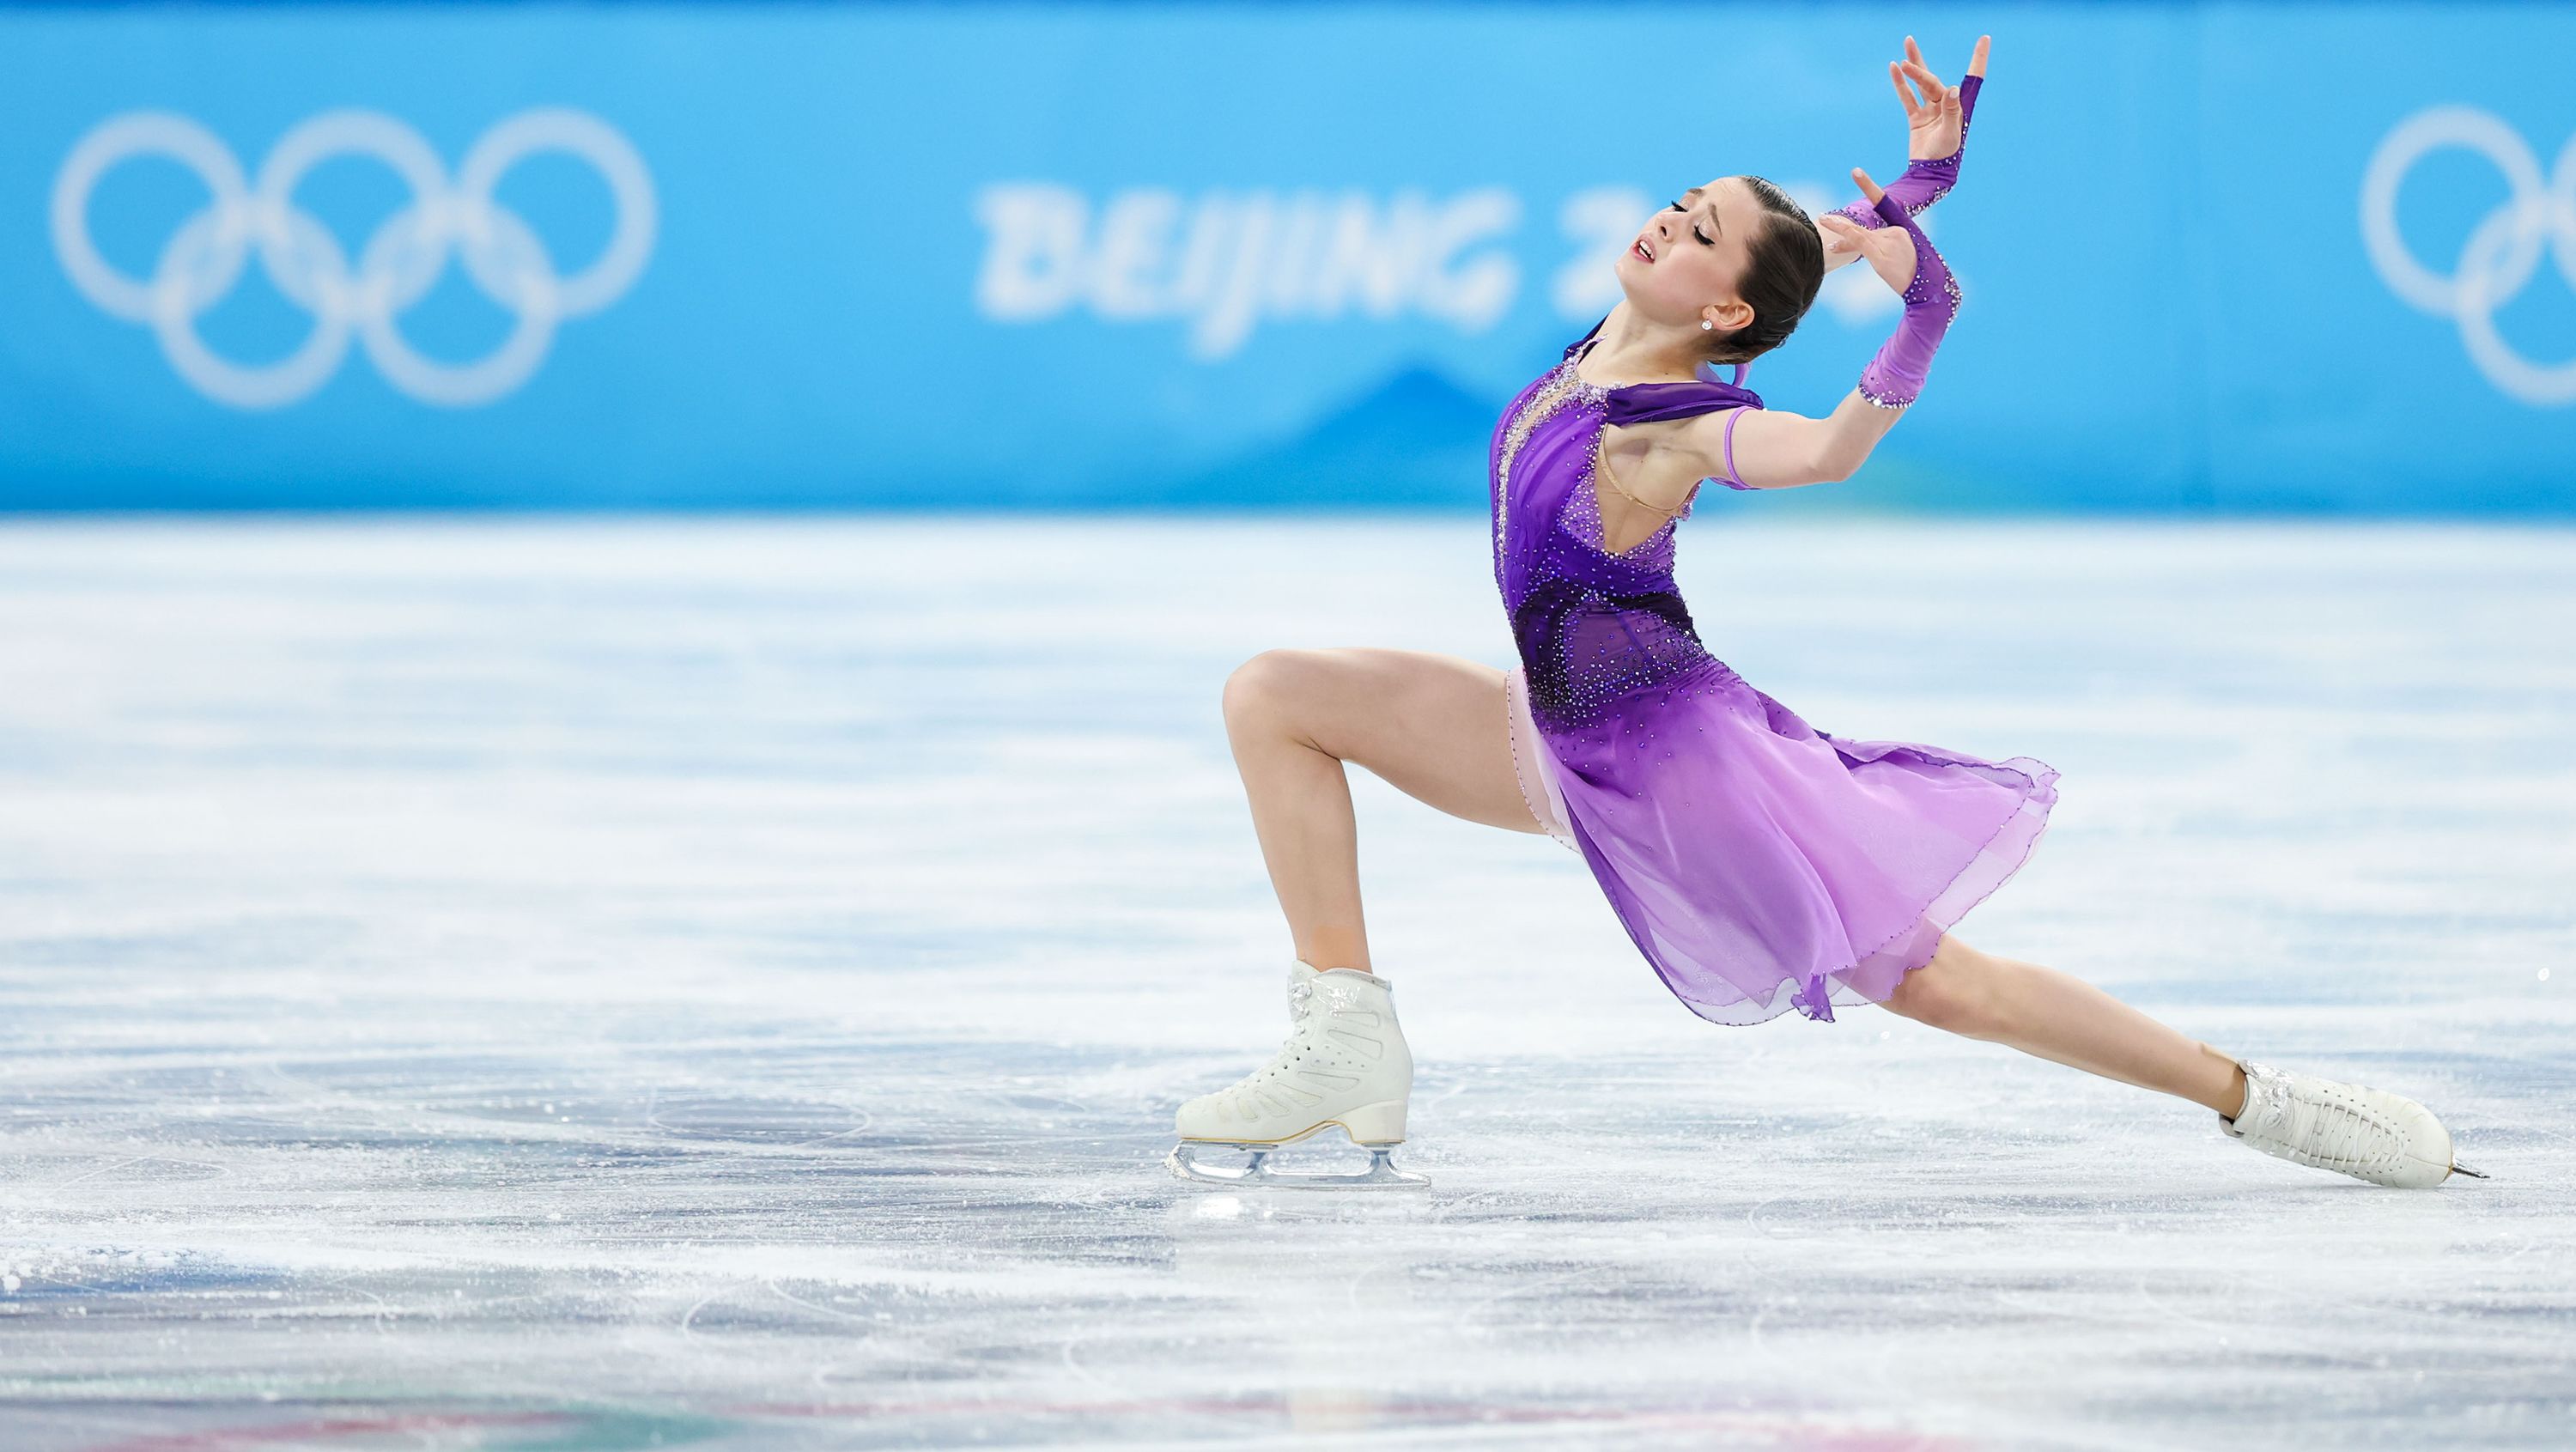 Winter Olympics 2022: What's the science behind ice skating?